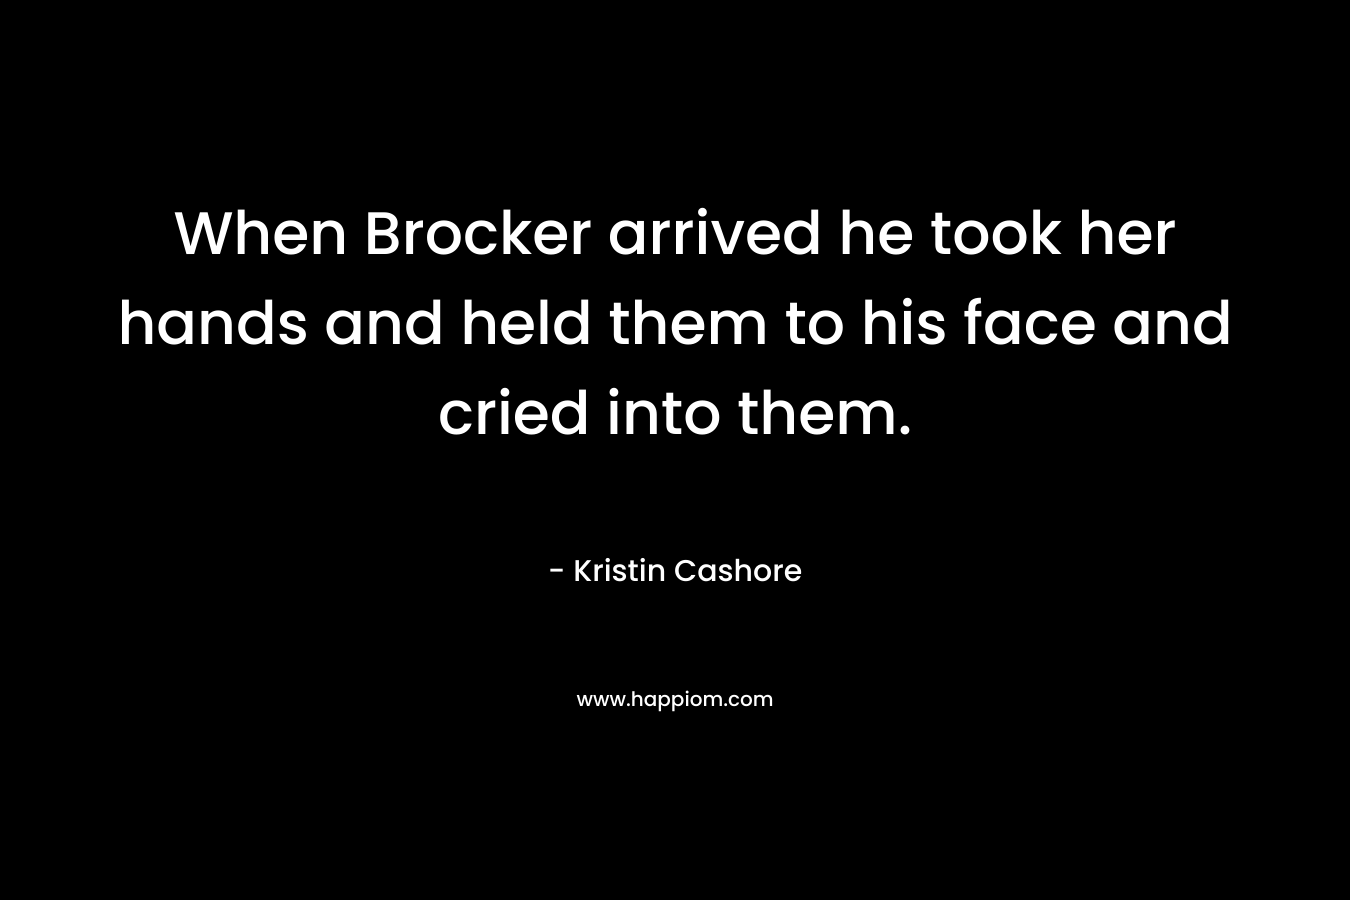 When Brocker arrived he took her hands and held them to his face and cried into them.